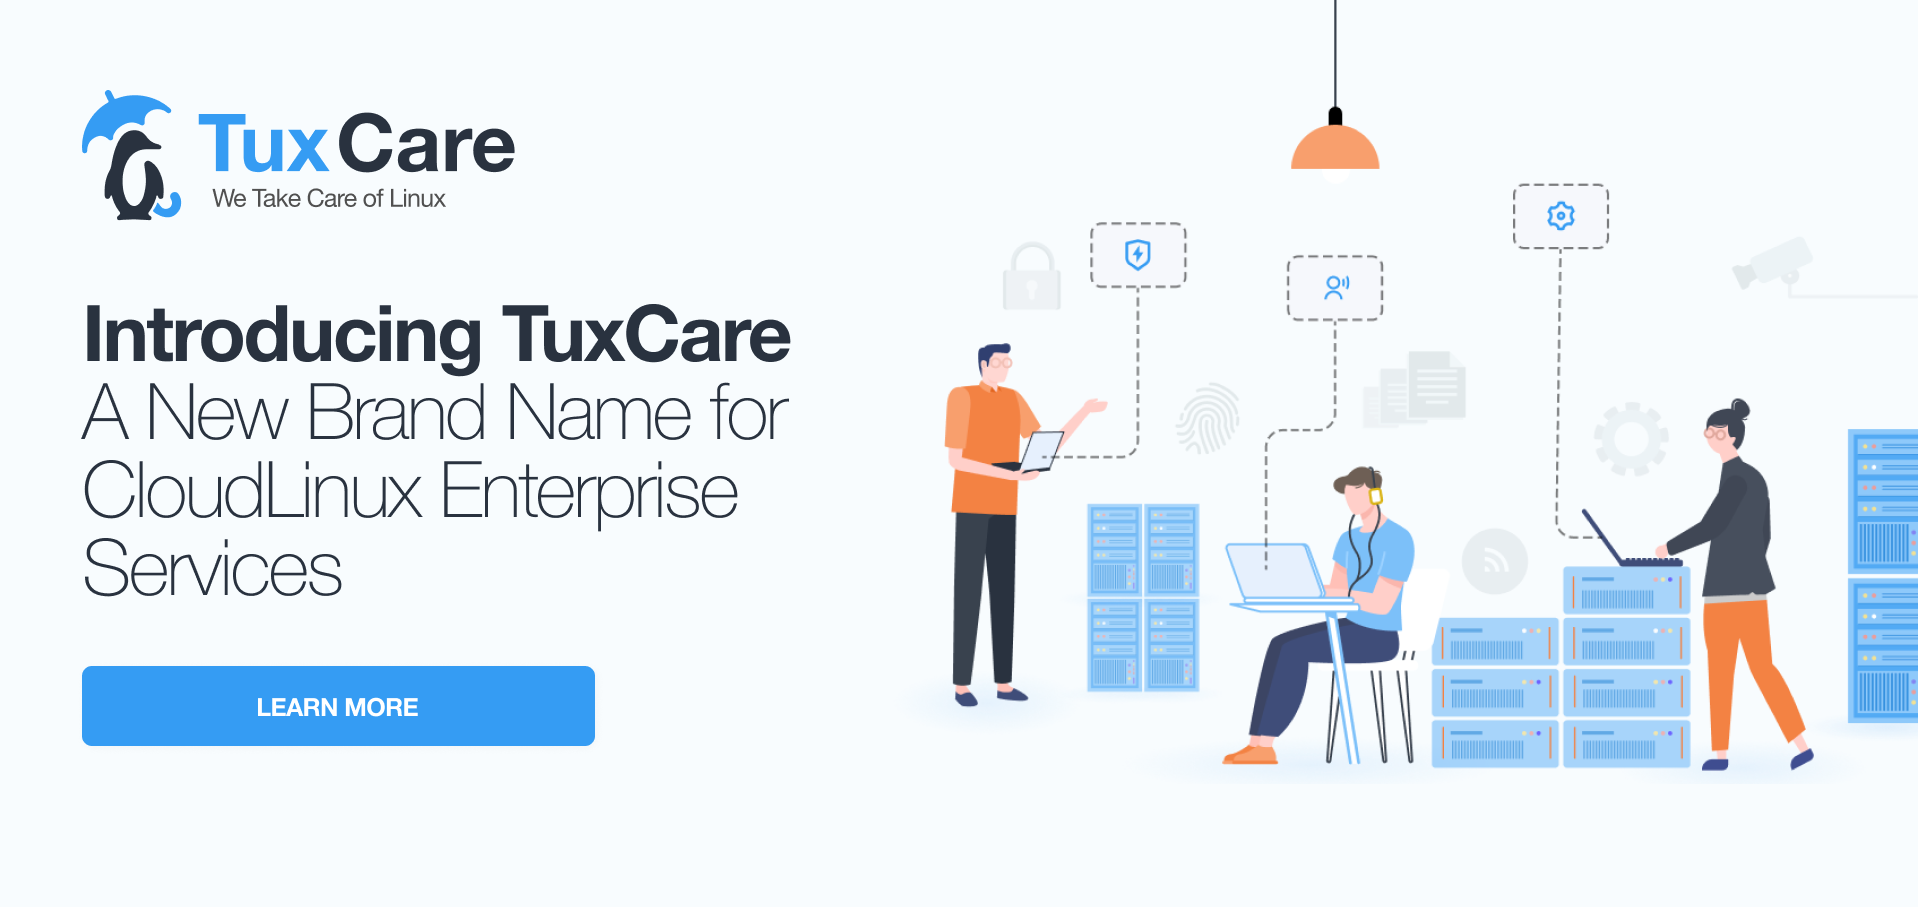 TuxCare - our new brand that brings together all Enterprise products